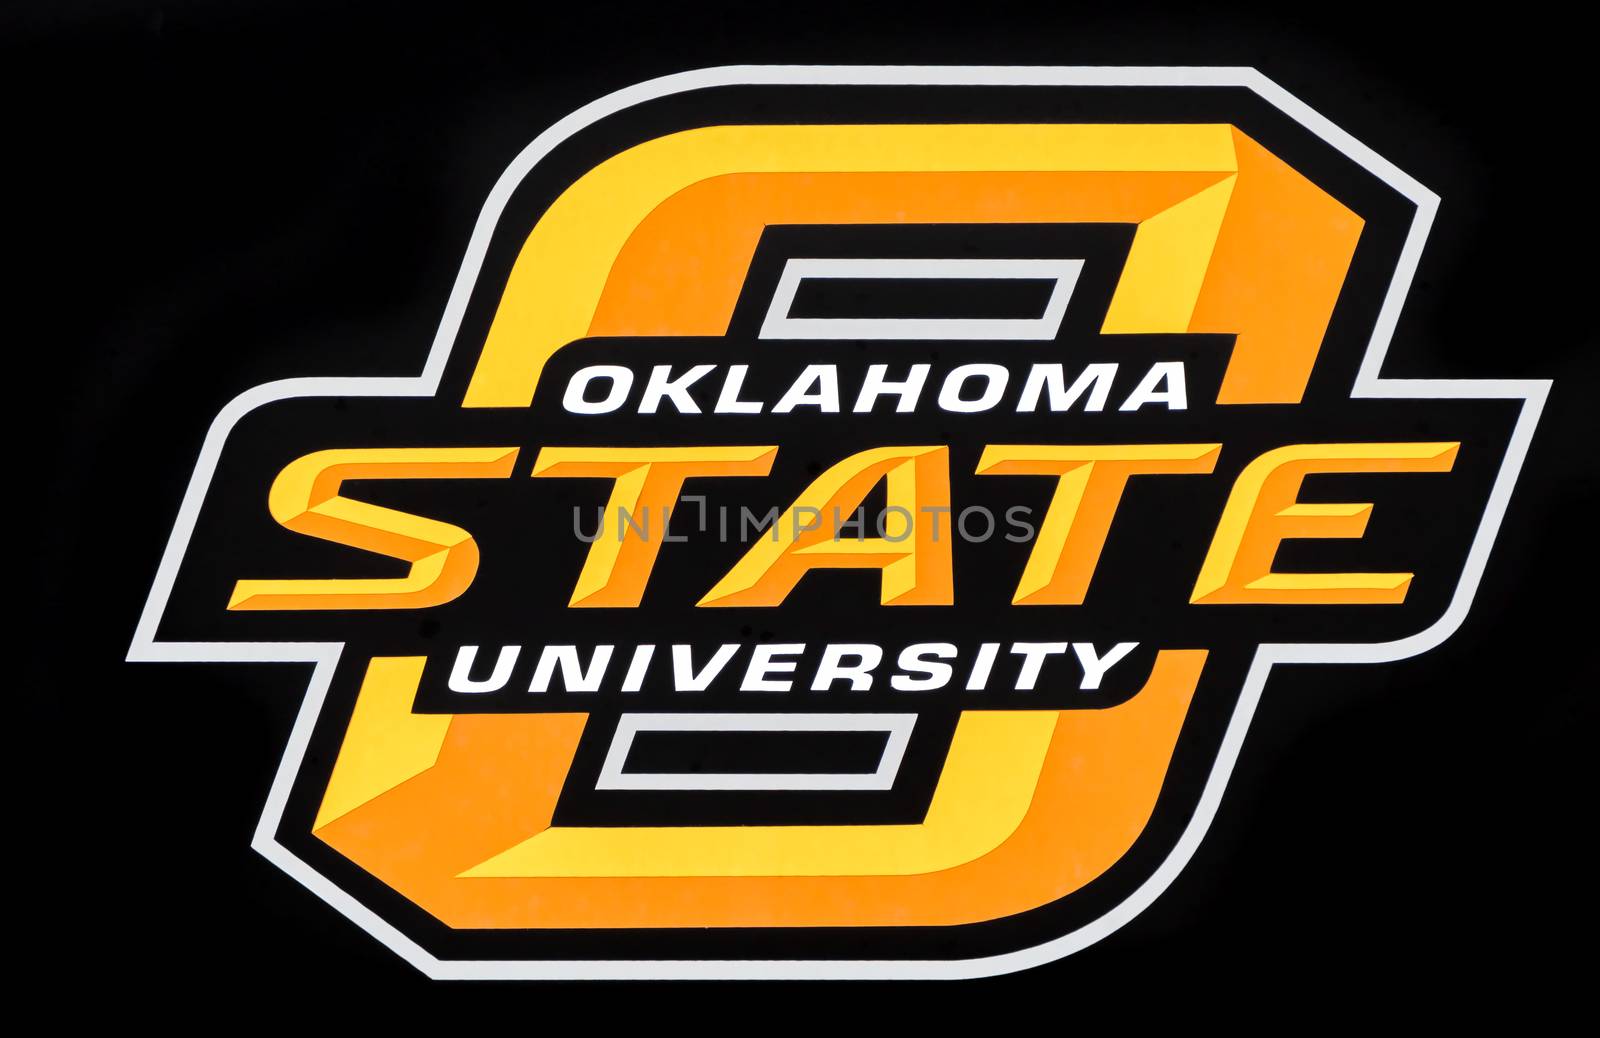 Oklahoma State University Logo and Seal by wolterk